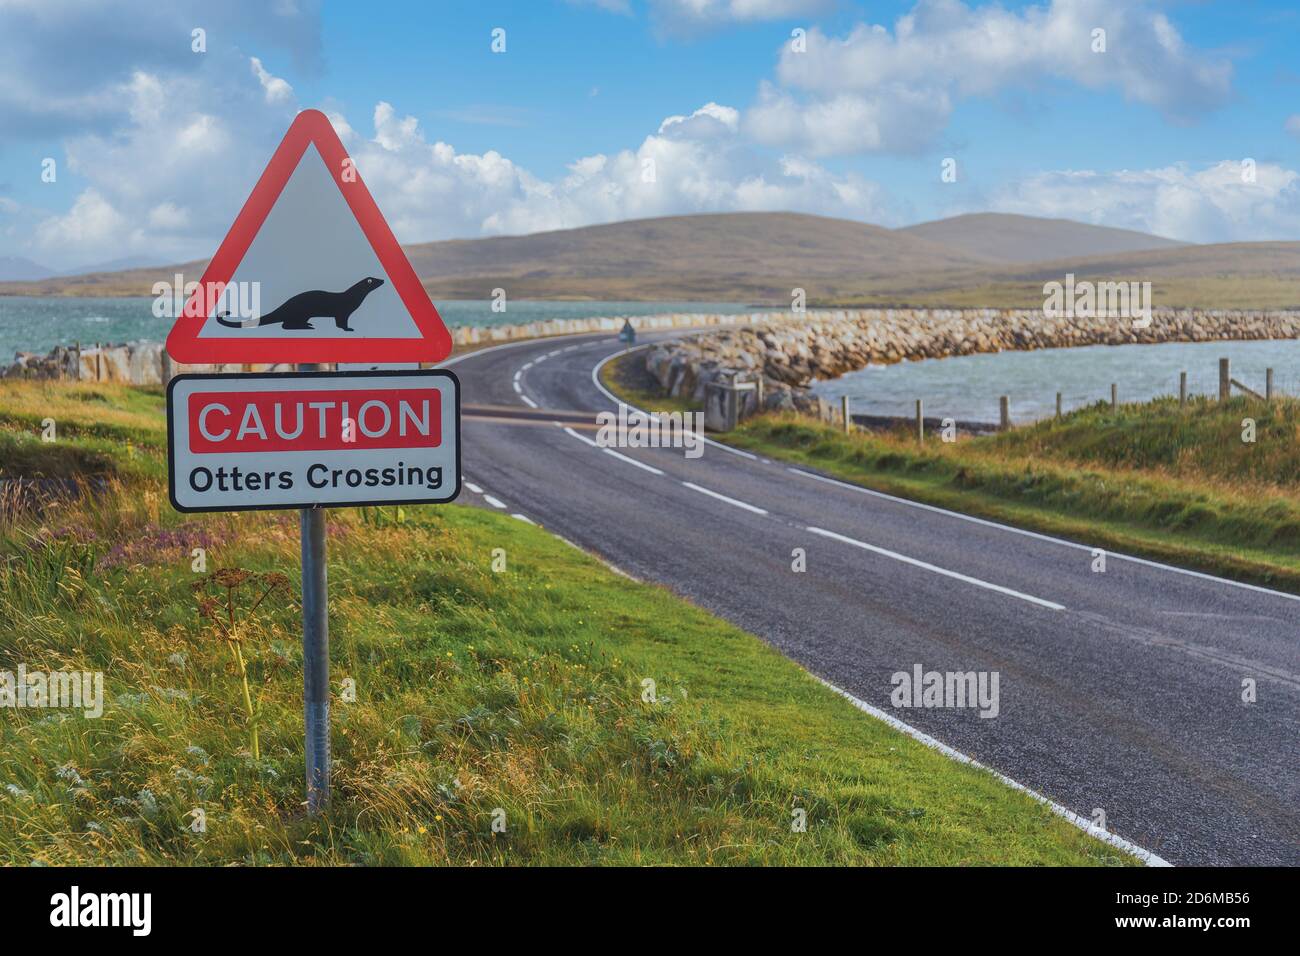 Caution Otters Crossing red triangle road sign by causeway, North Uist Outer Hebrides Western Isles Scotland UK Britain Stock Photo